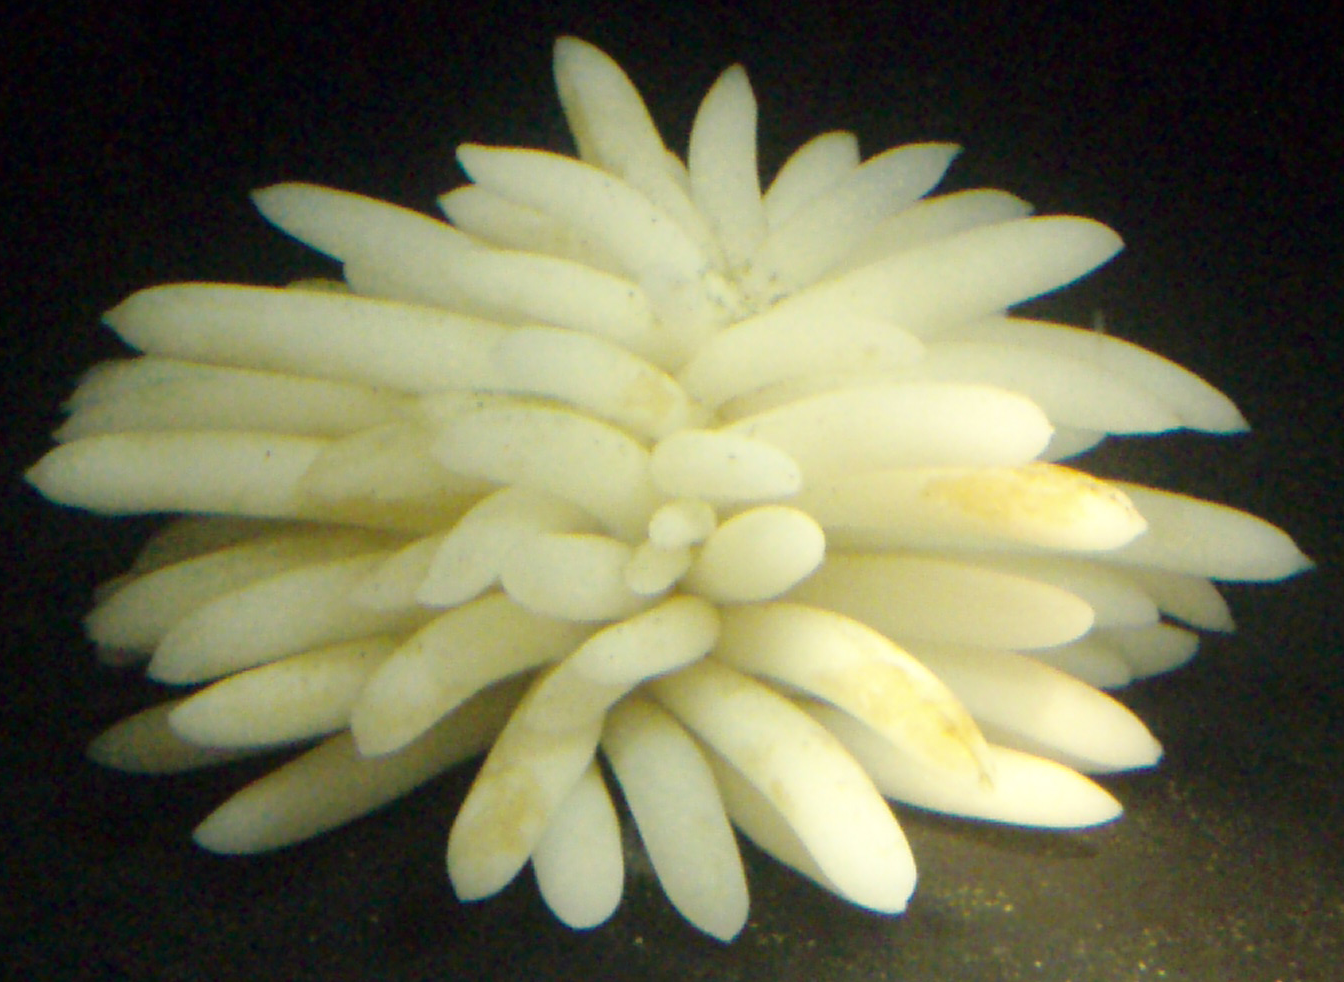 Picture of a clutch of squid egg (species type unfortunately not specified) cases on display at the Monterery Aquarium. Photographed on April 2, 2007.